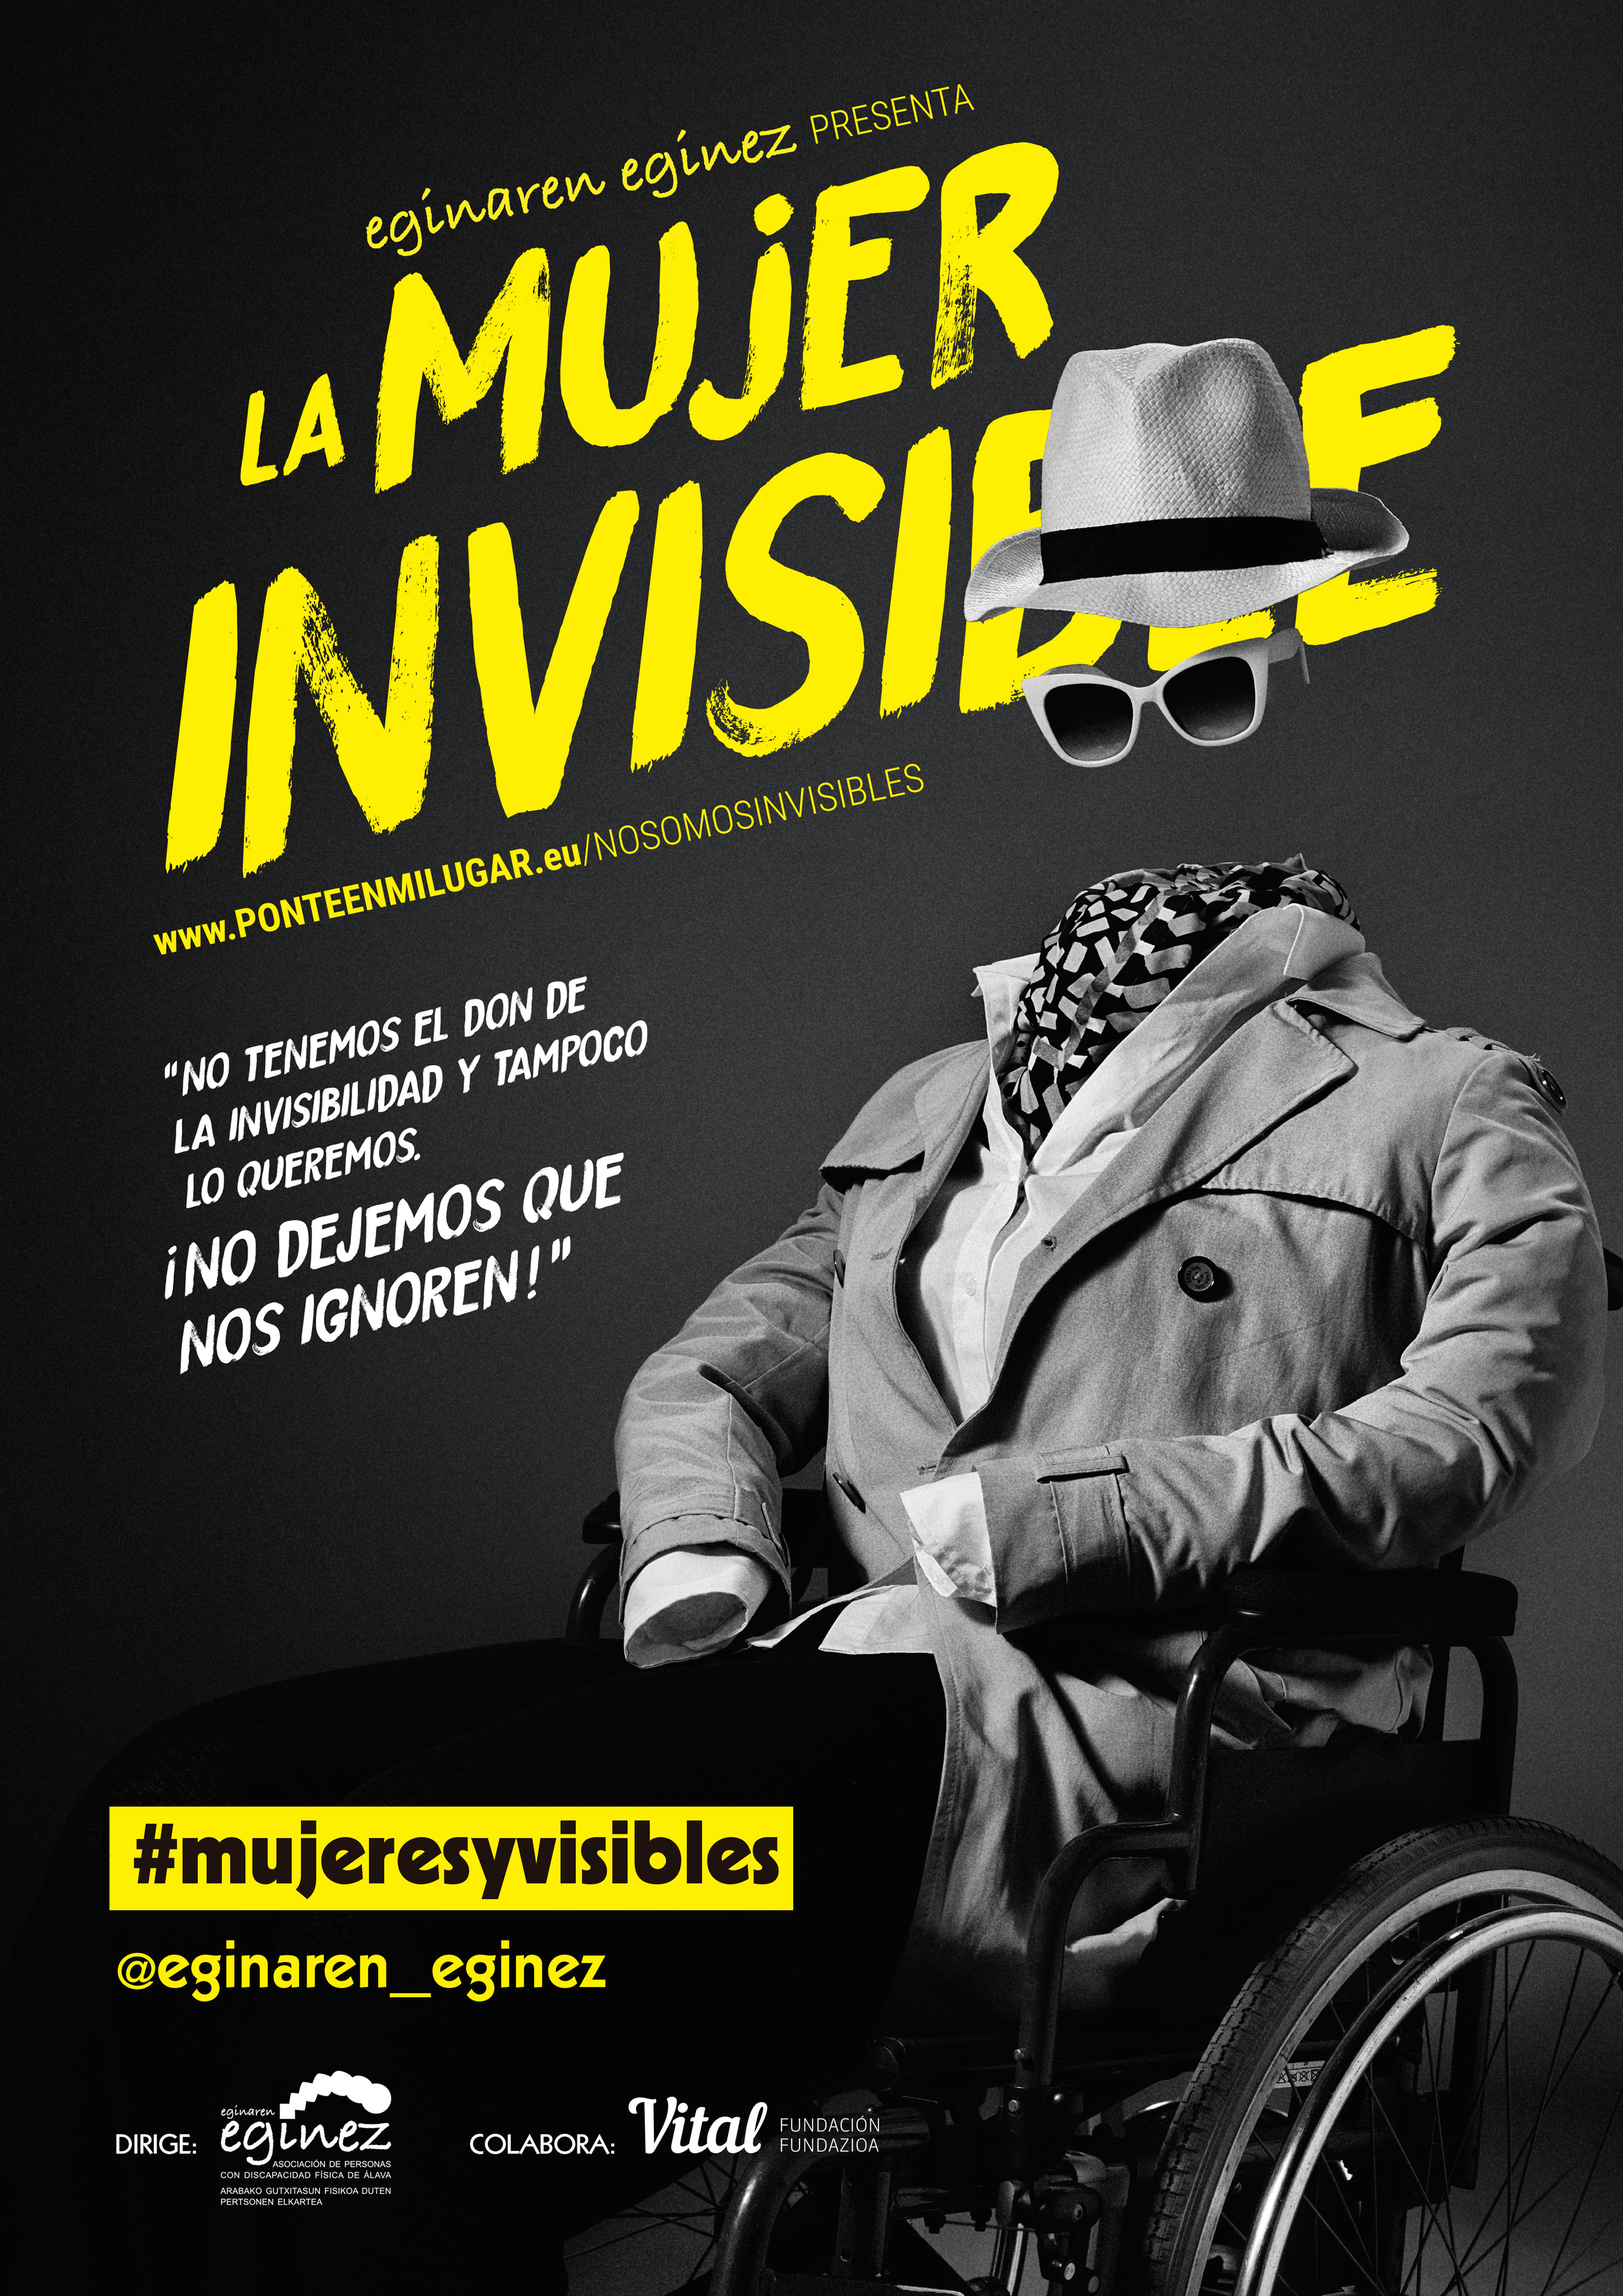 La mujer invisible by ideolab - Creative Work